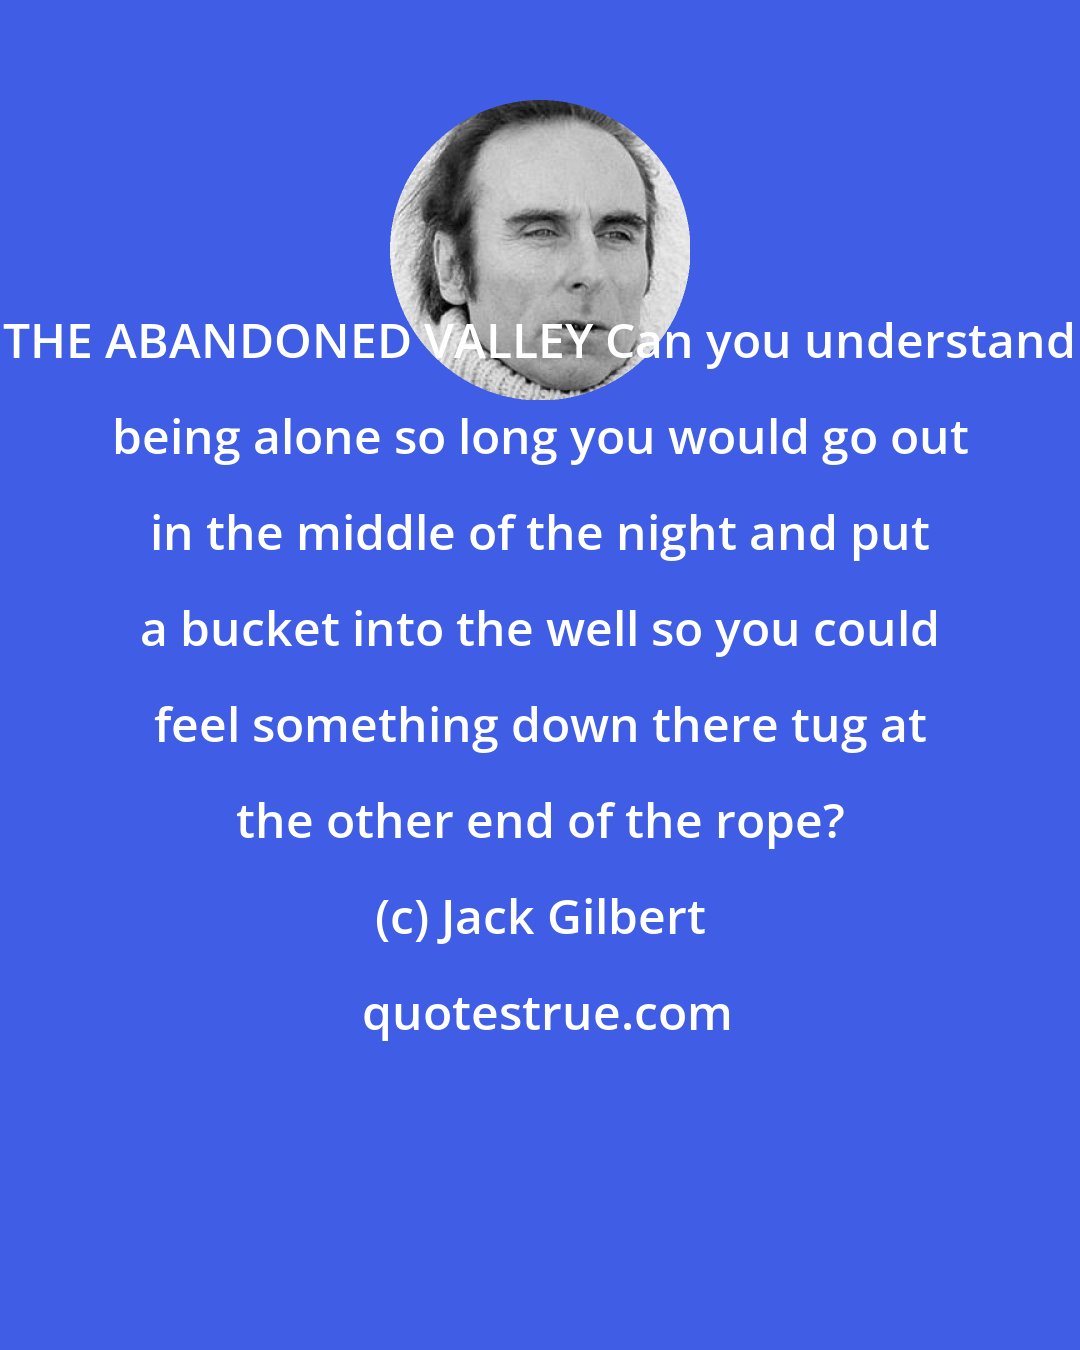 Jack Gilbert: THE ABANDONED VALLEY Can you understand being alone so long you would go out in the middle of the night and put a bucket into the well so you could feel something down there tug at the other end of the rope?